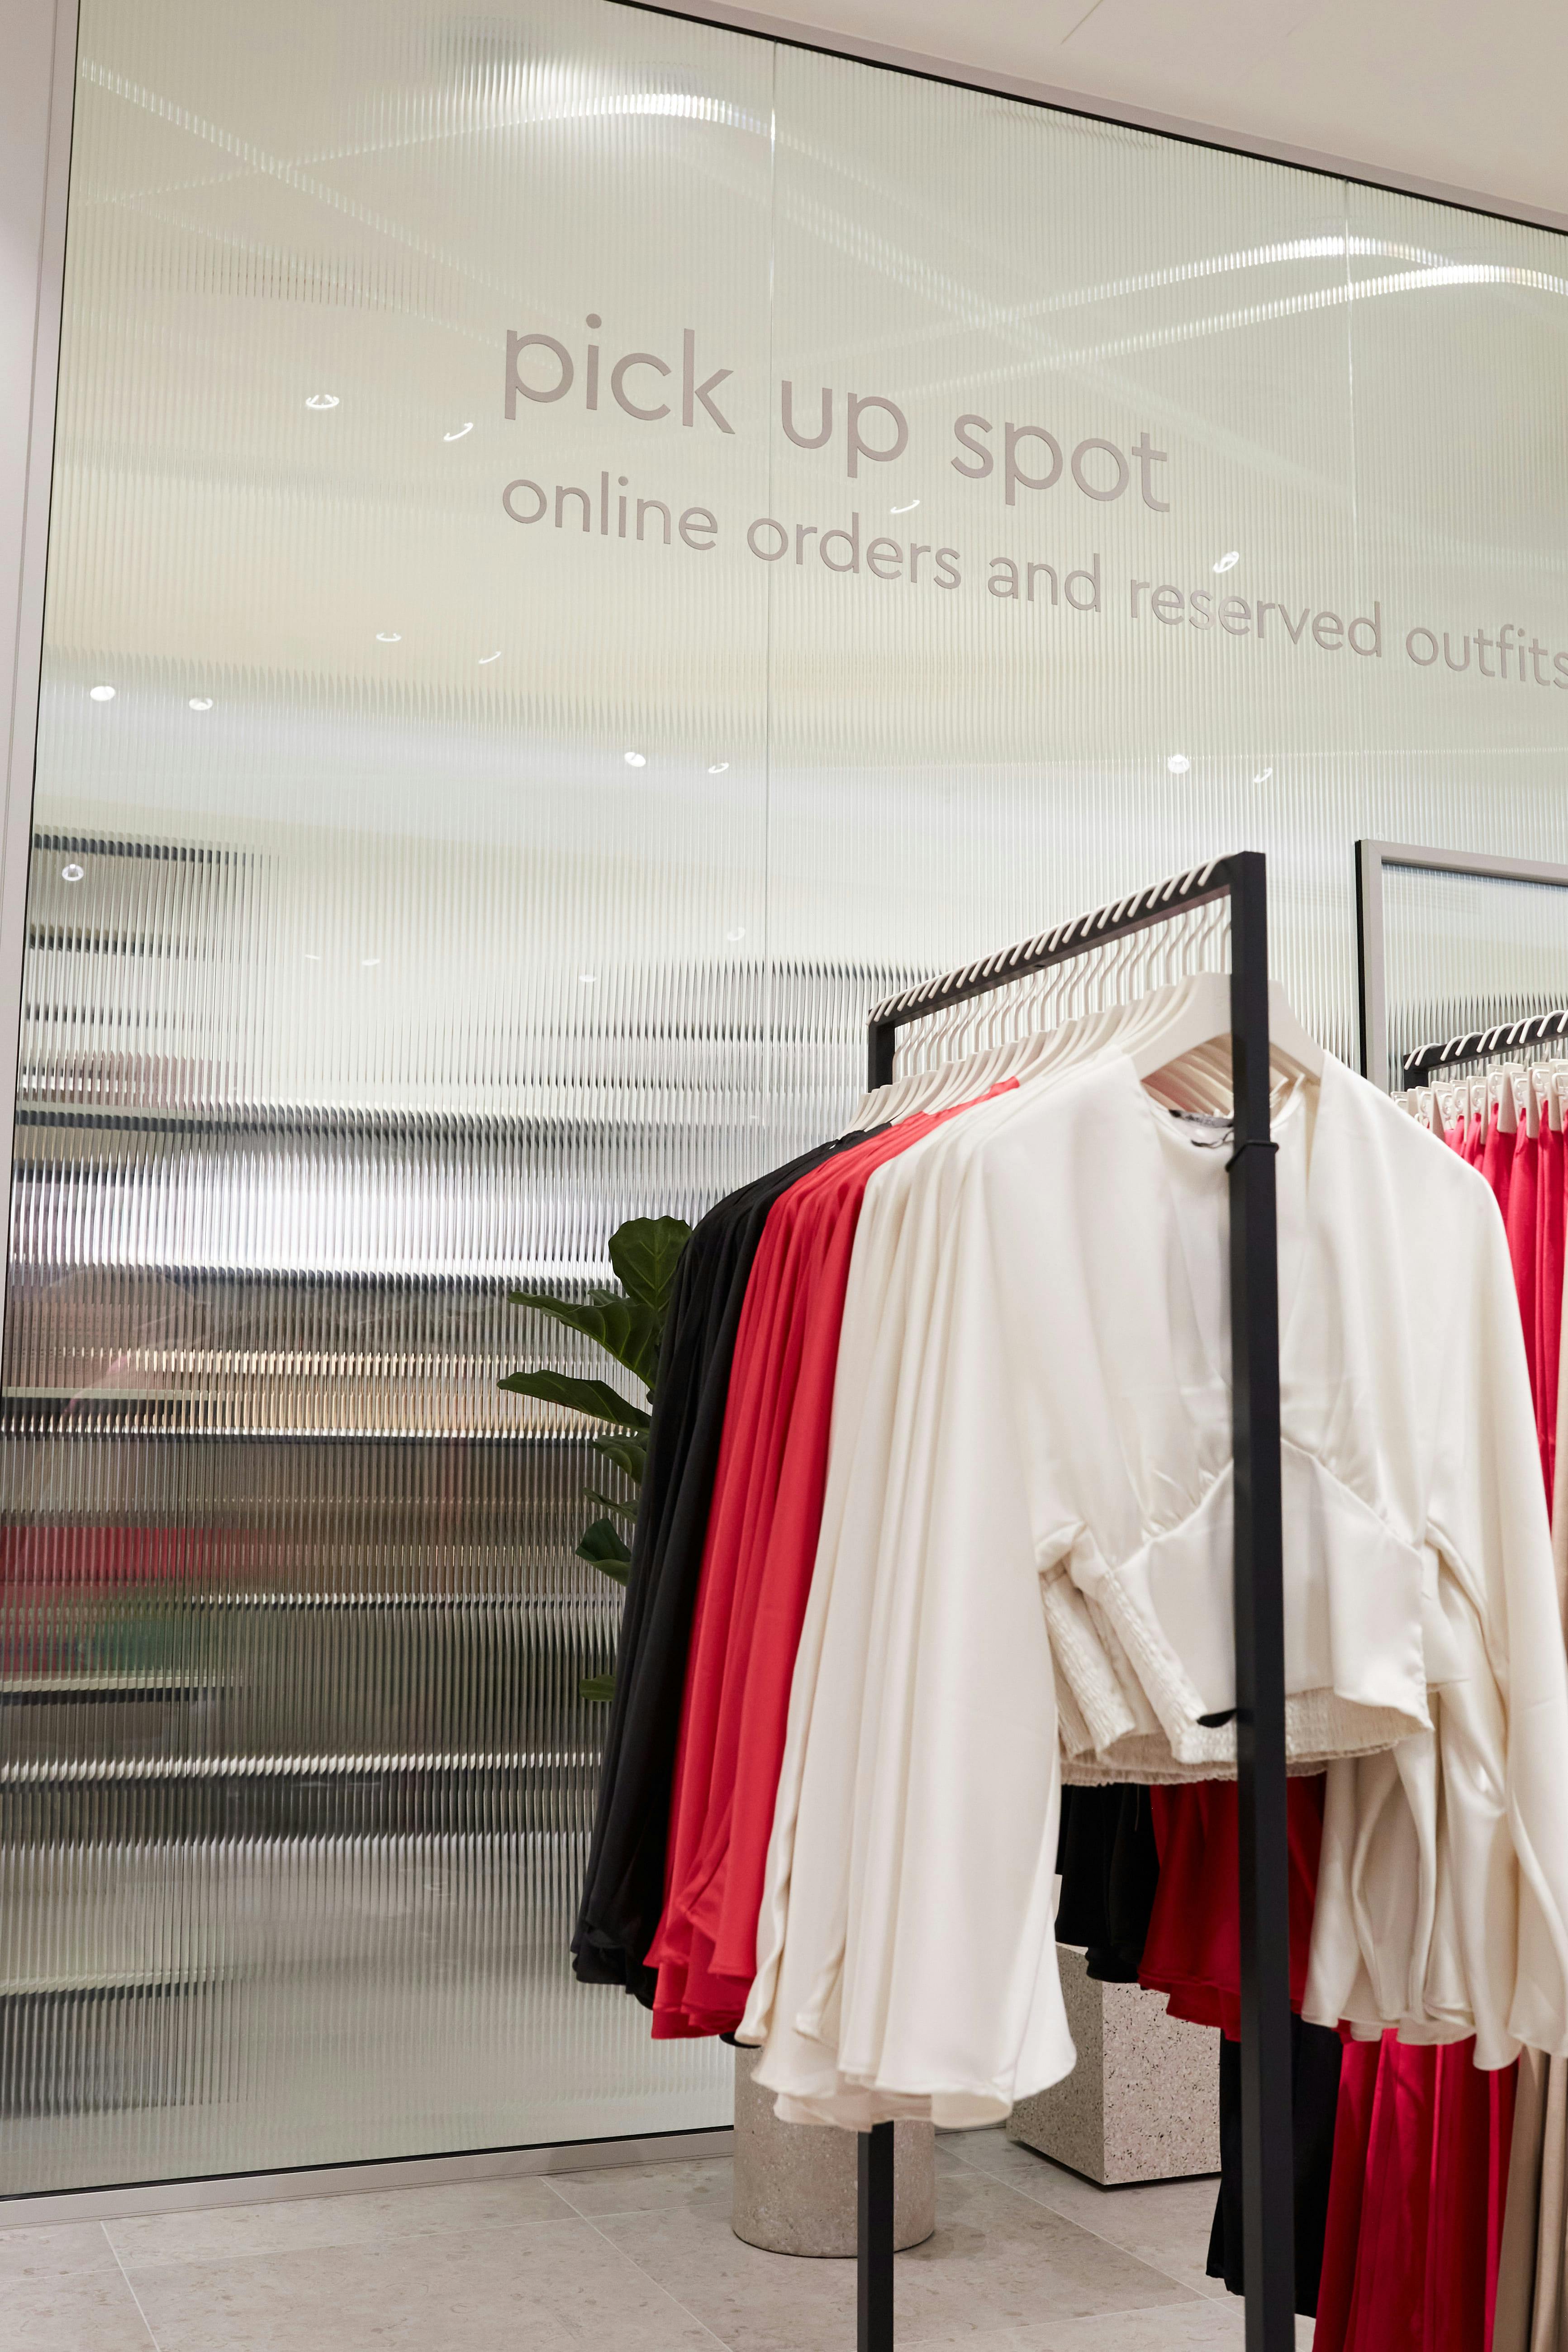 Store interior 2.0: Innovative technology creates store environments for the future